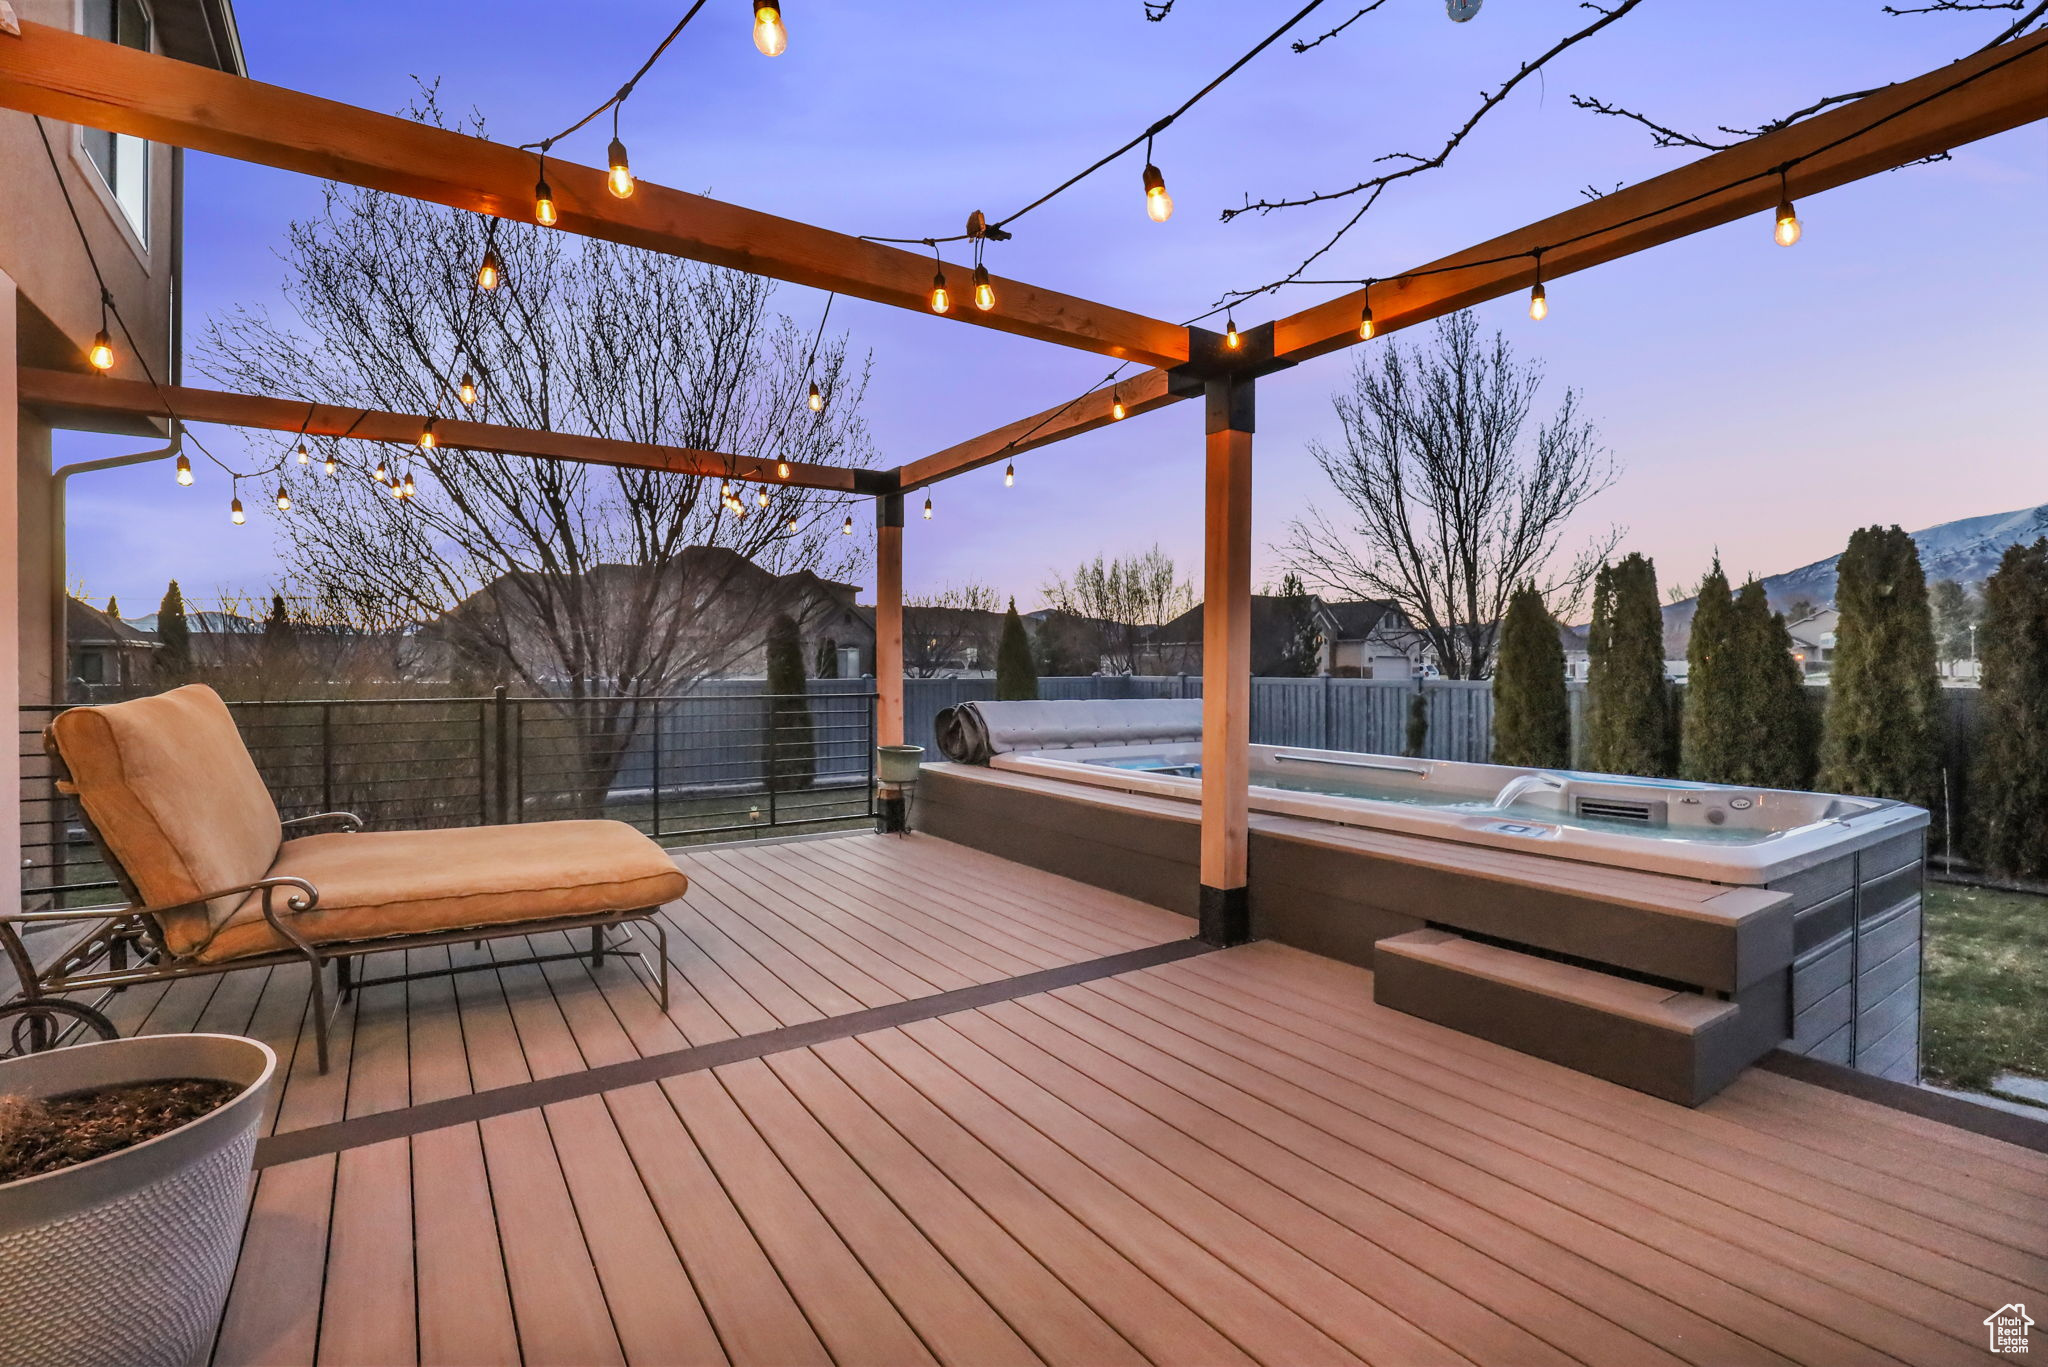 Deck at dusk featuring a hot tub